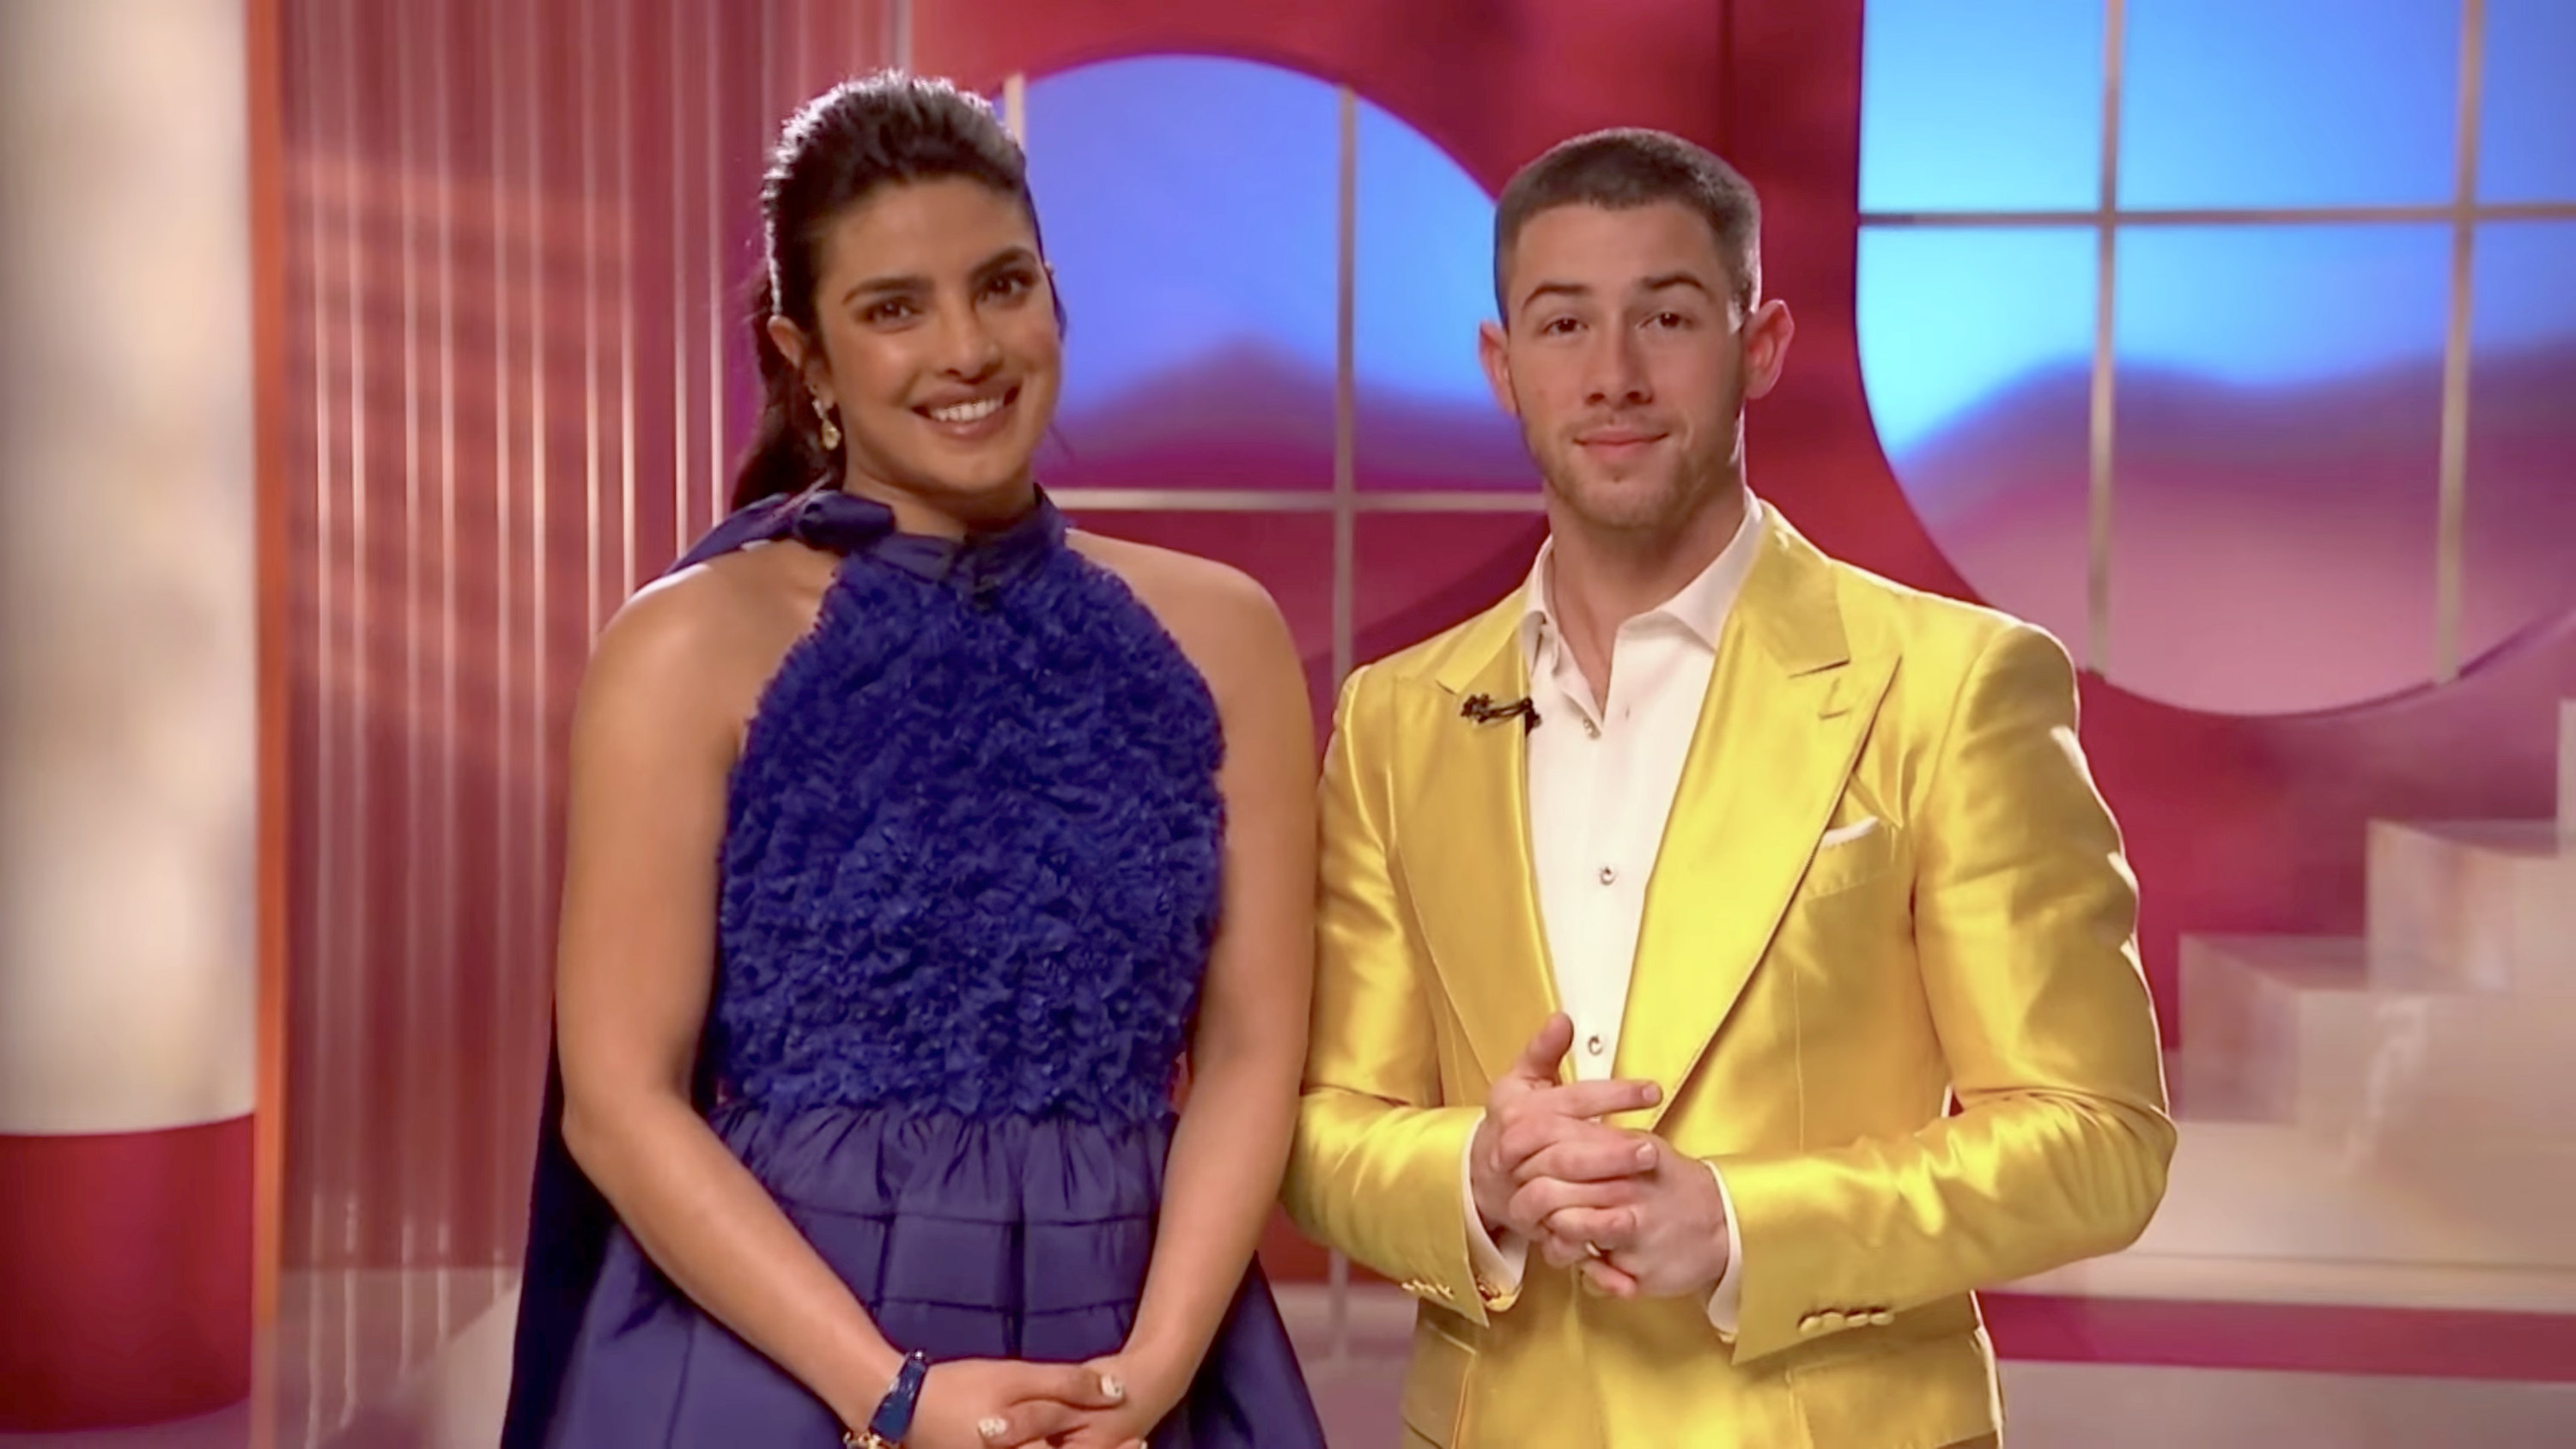 Priyanka in a halter dress standing next to Nick who&#x27;s wearing a metallic colored suit